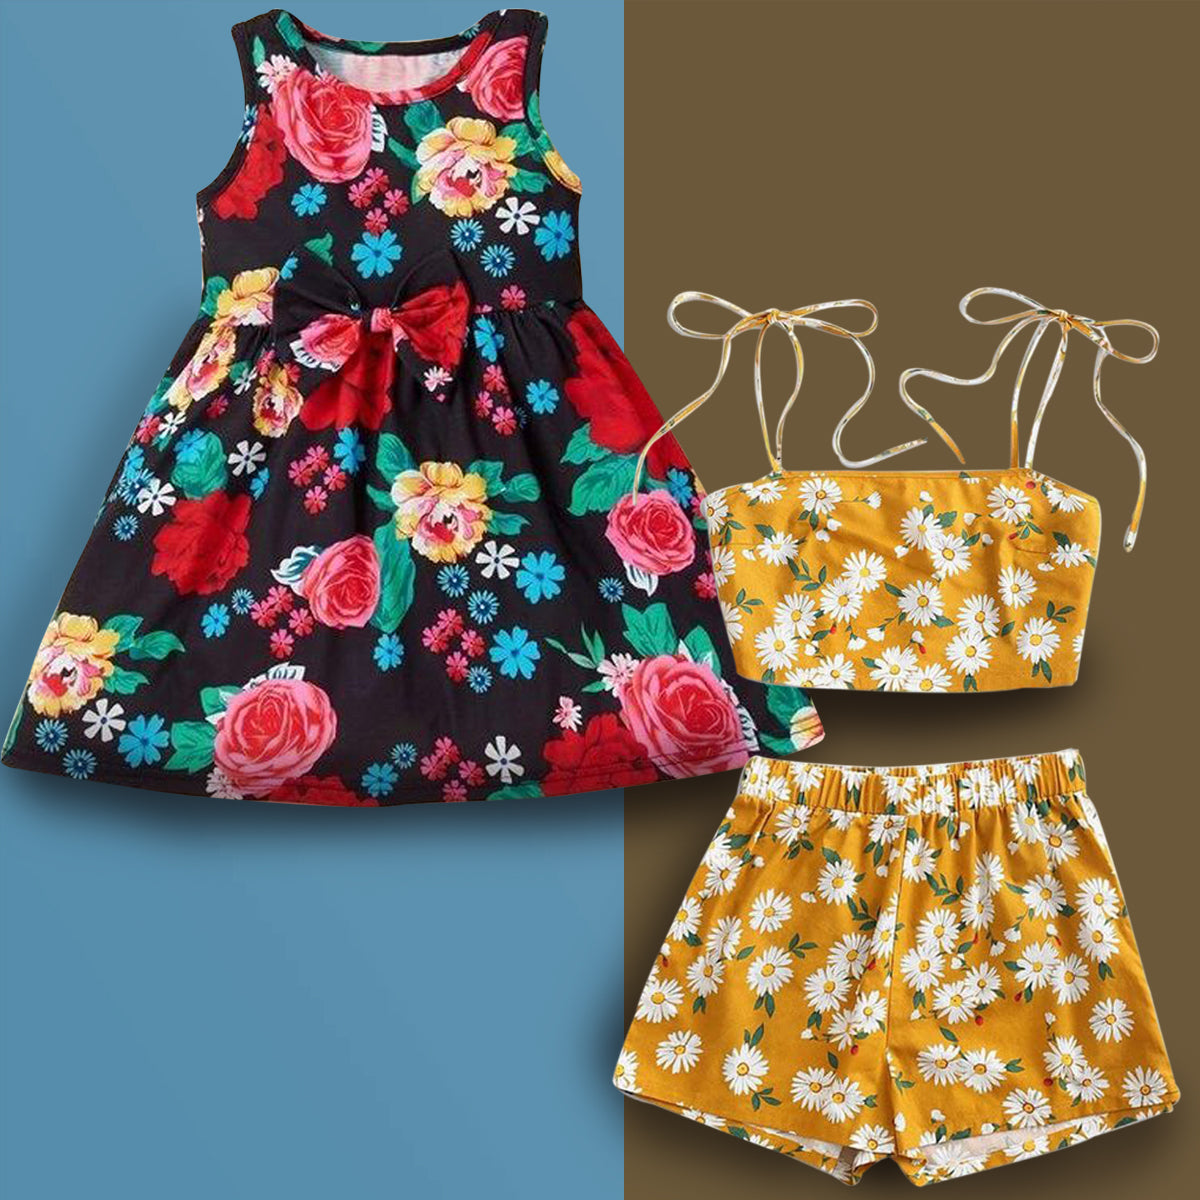 Princess BabyGirl's Stylish Floral Tunic Frocks & Yellow Lining Strip Set Combo for Kids.